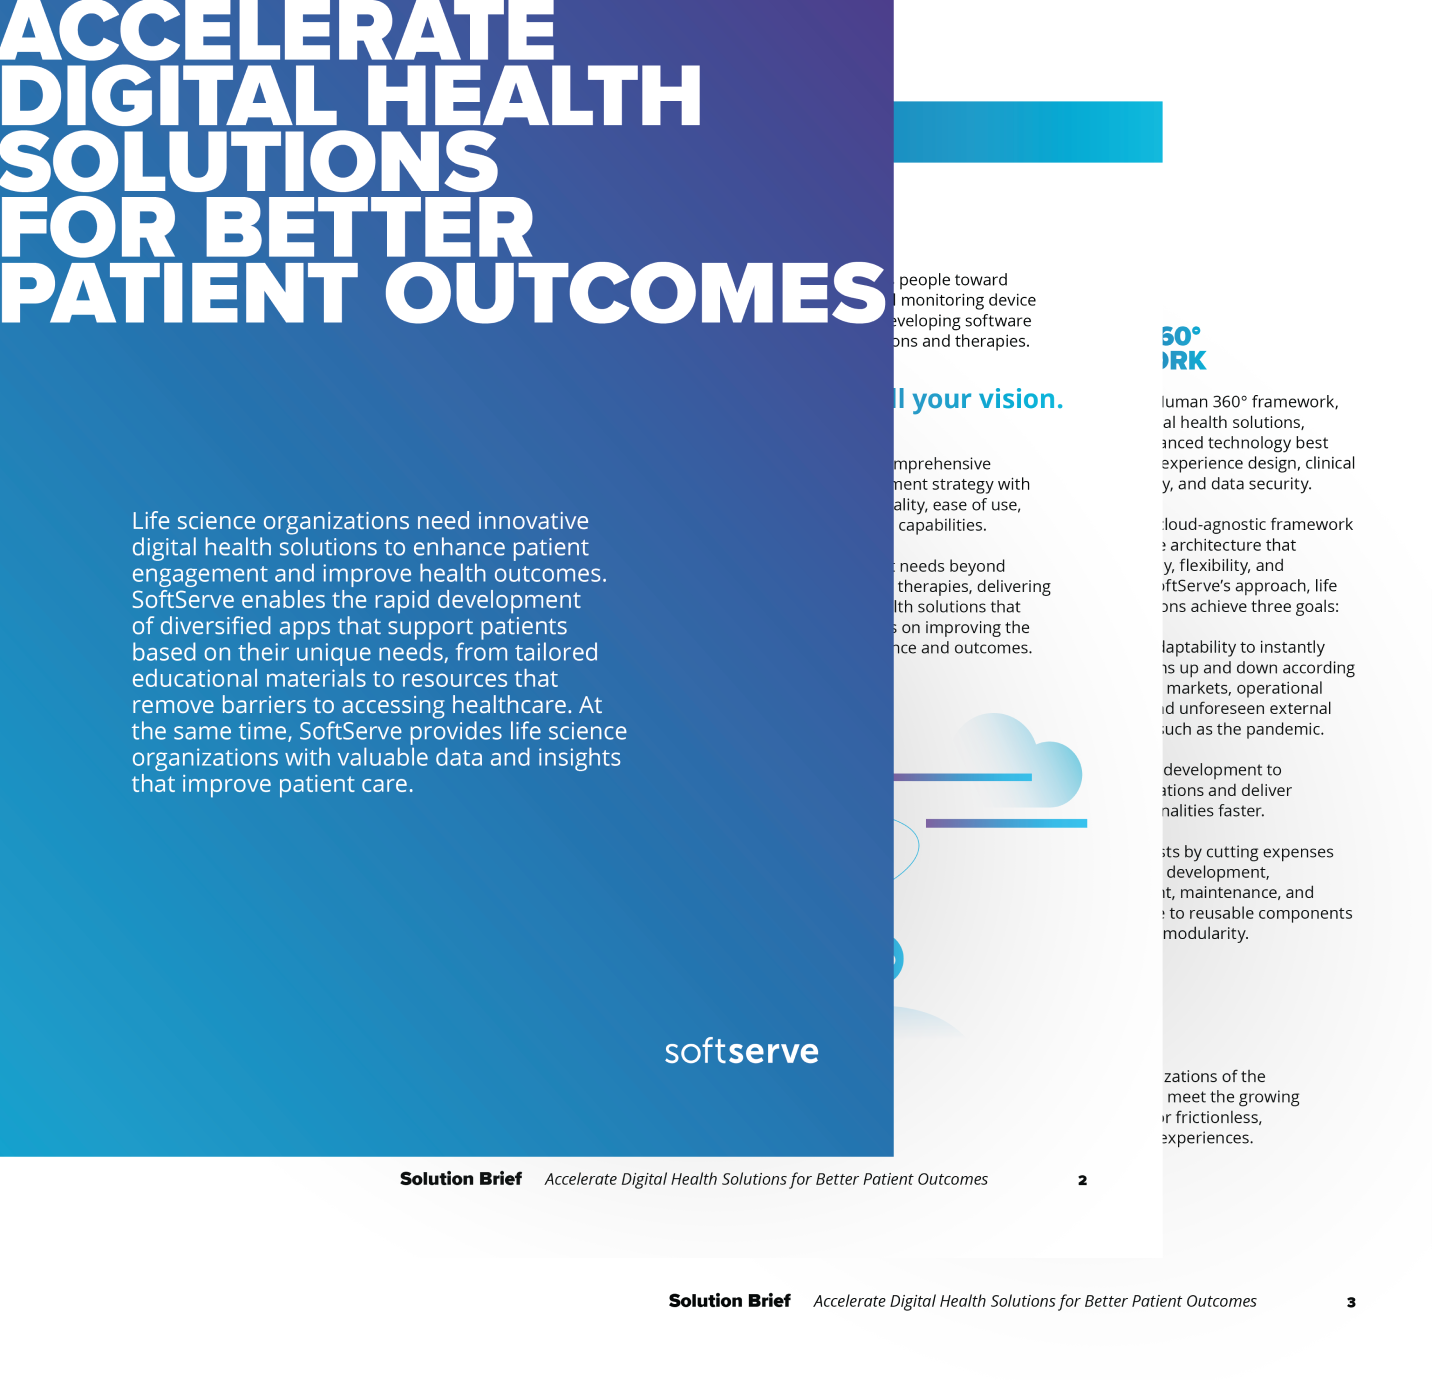 roll-out-digital-health-solutions-faster-and-cost-effectively-preview